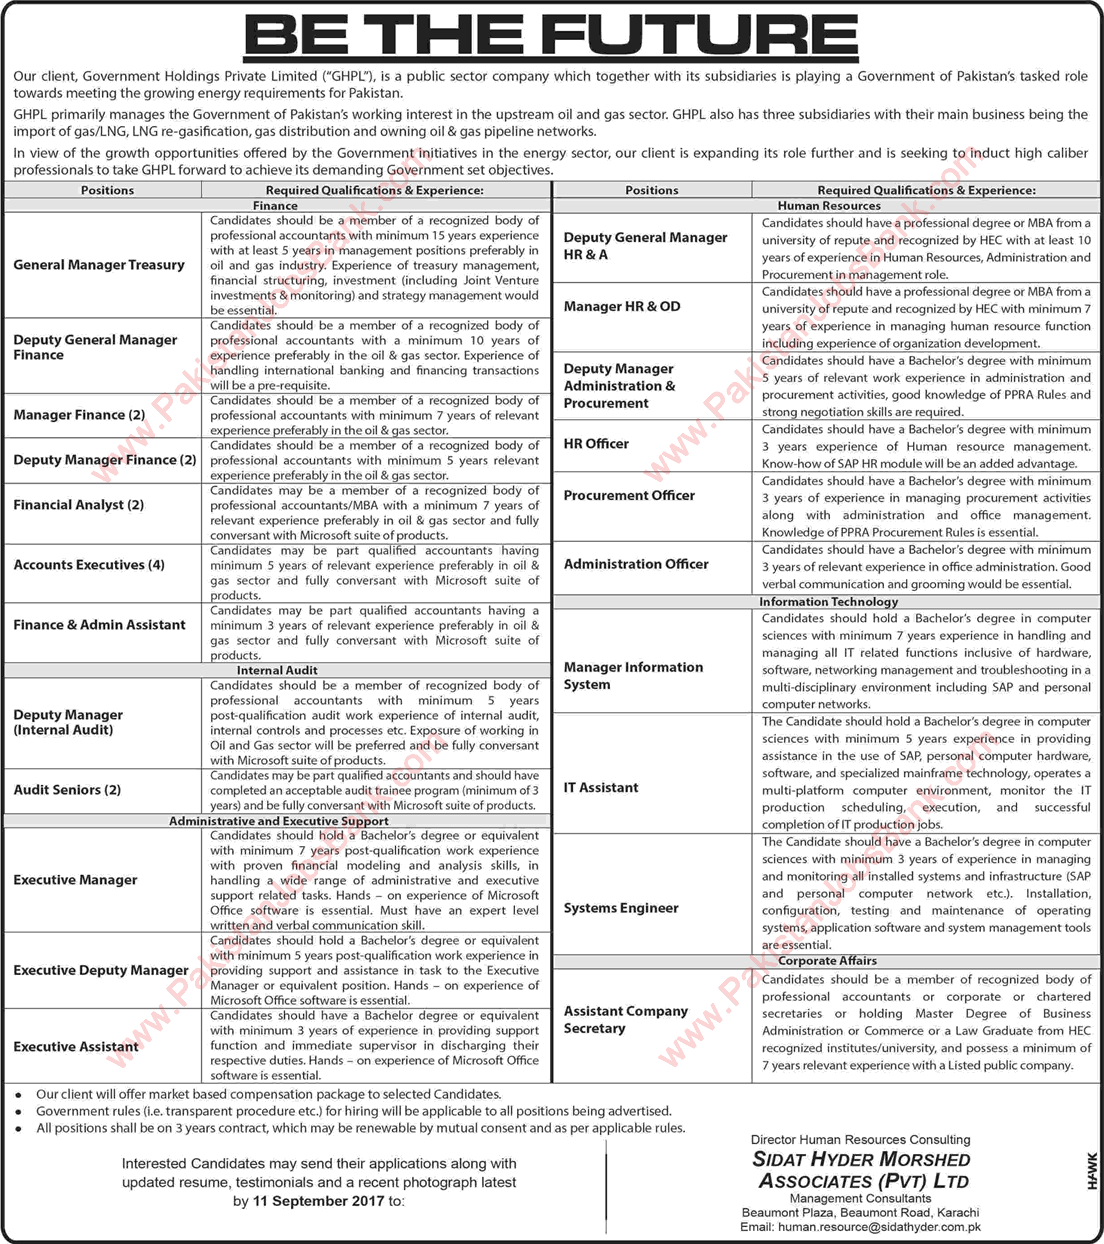 Government Holdings Private Limited Pakistan Jobs 2017 August GHPL Sidat Hyder Morshed Associates Latest